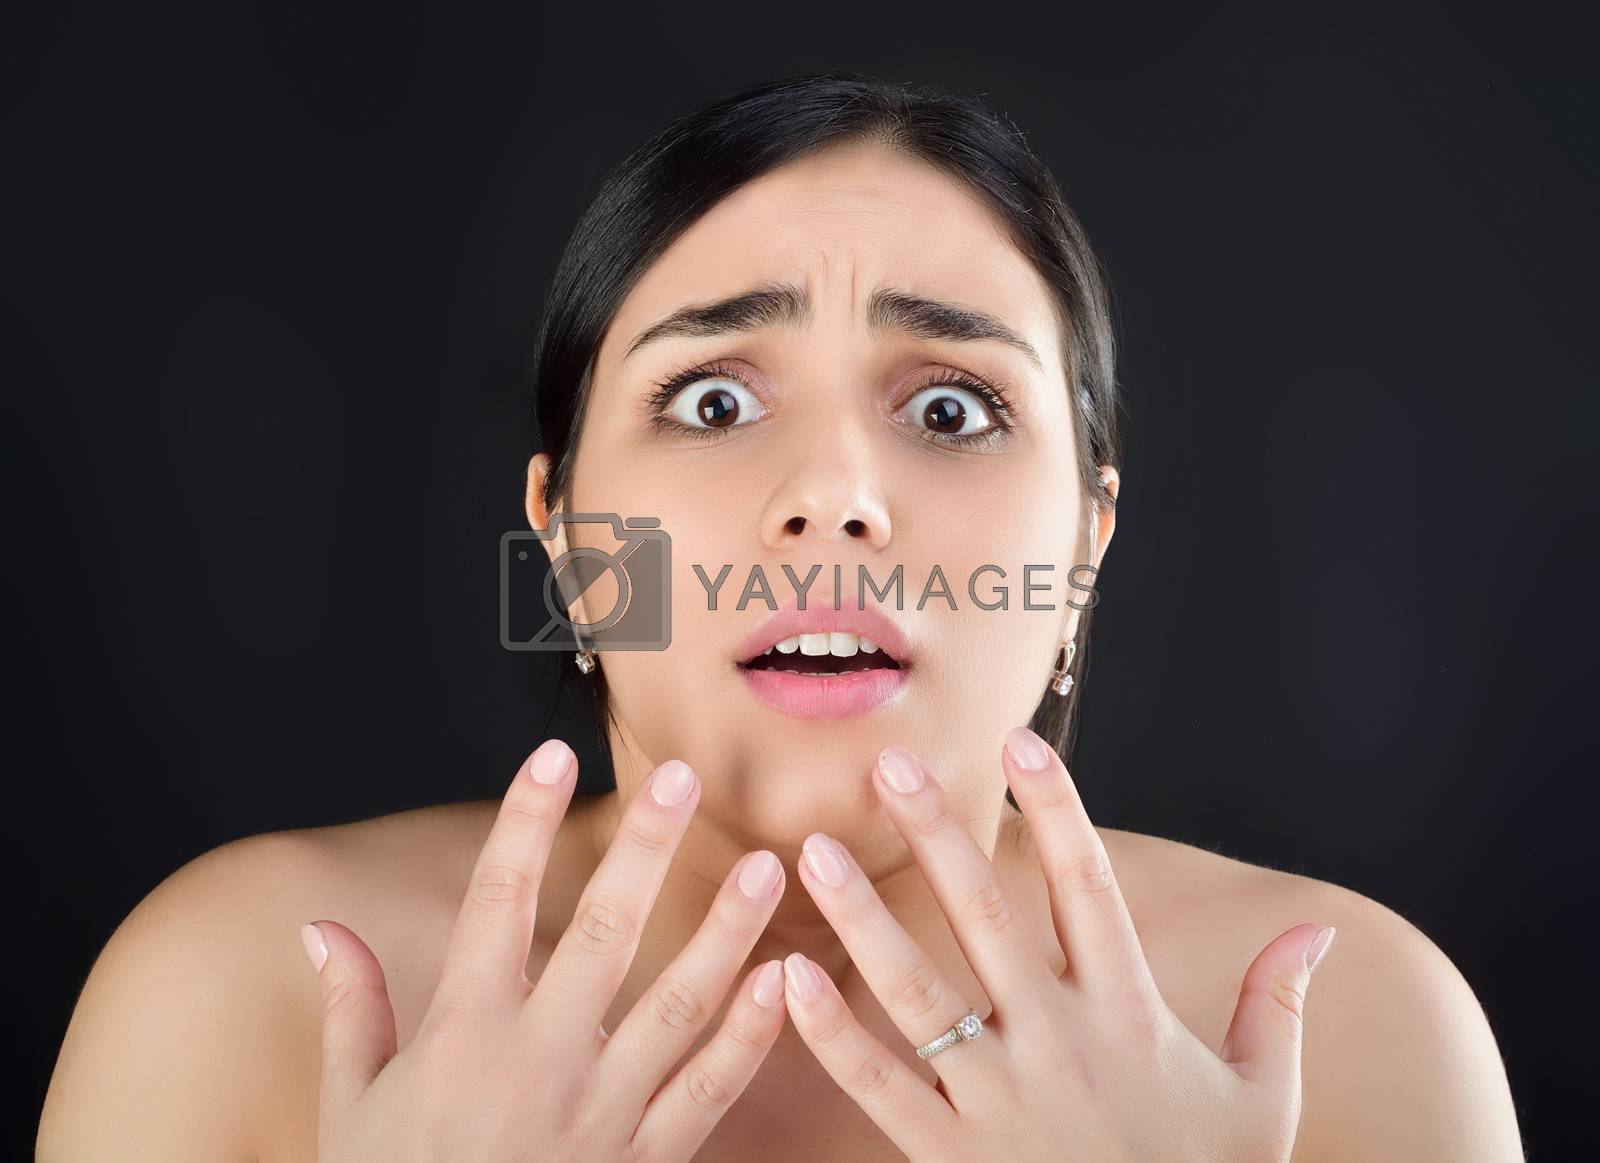 Royalty free image of Beauty portrait of a girl with fingers near her face who looks at the camera with fear or surprise by xzgorik